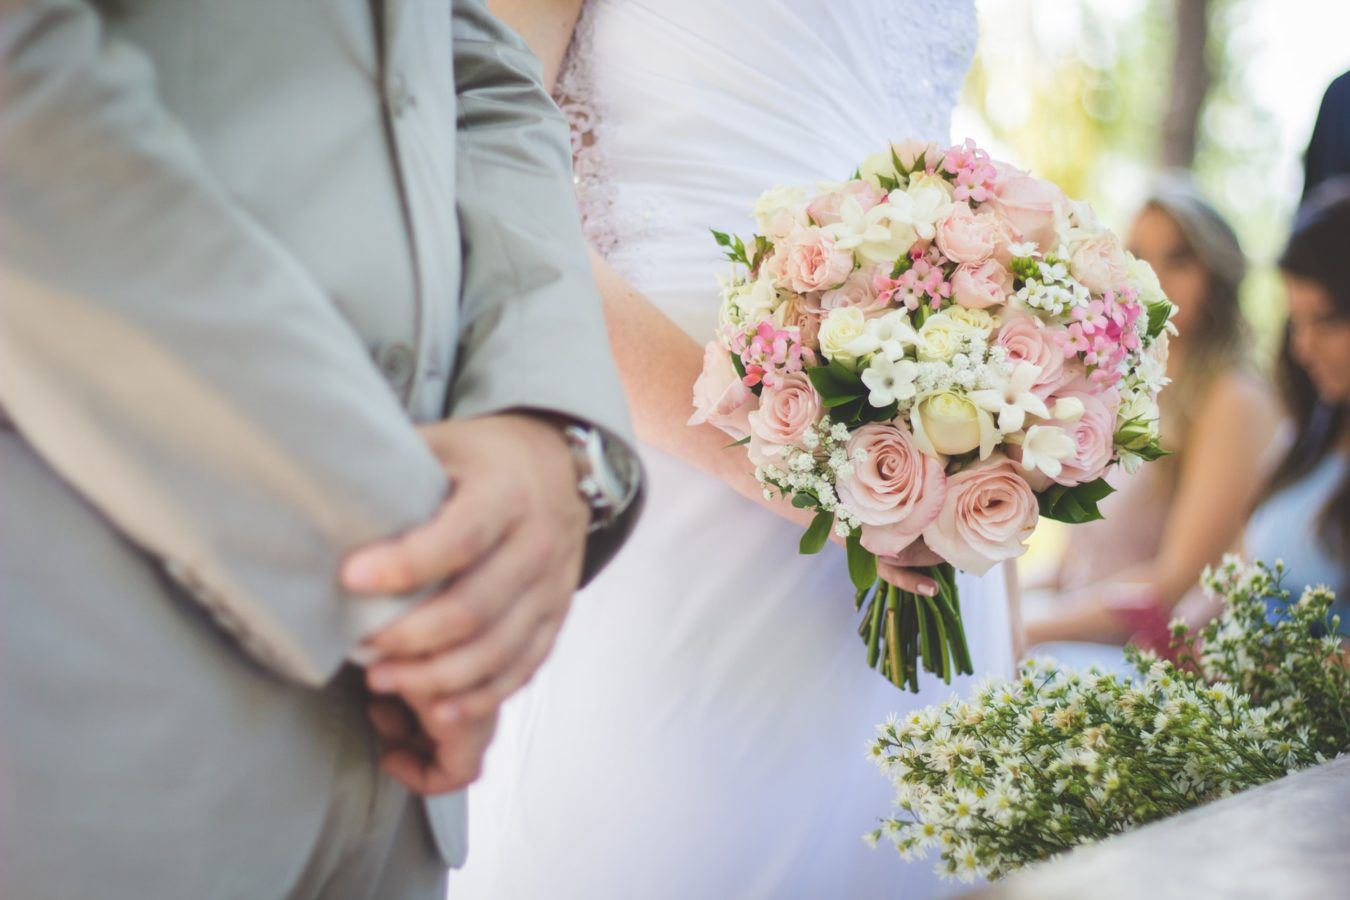 What to do if two of your wedding vendors really don’t get along